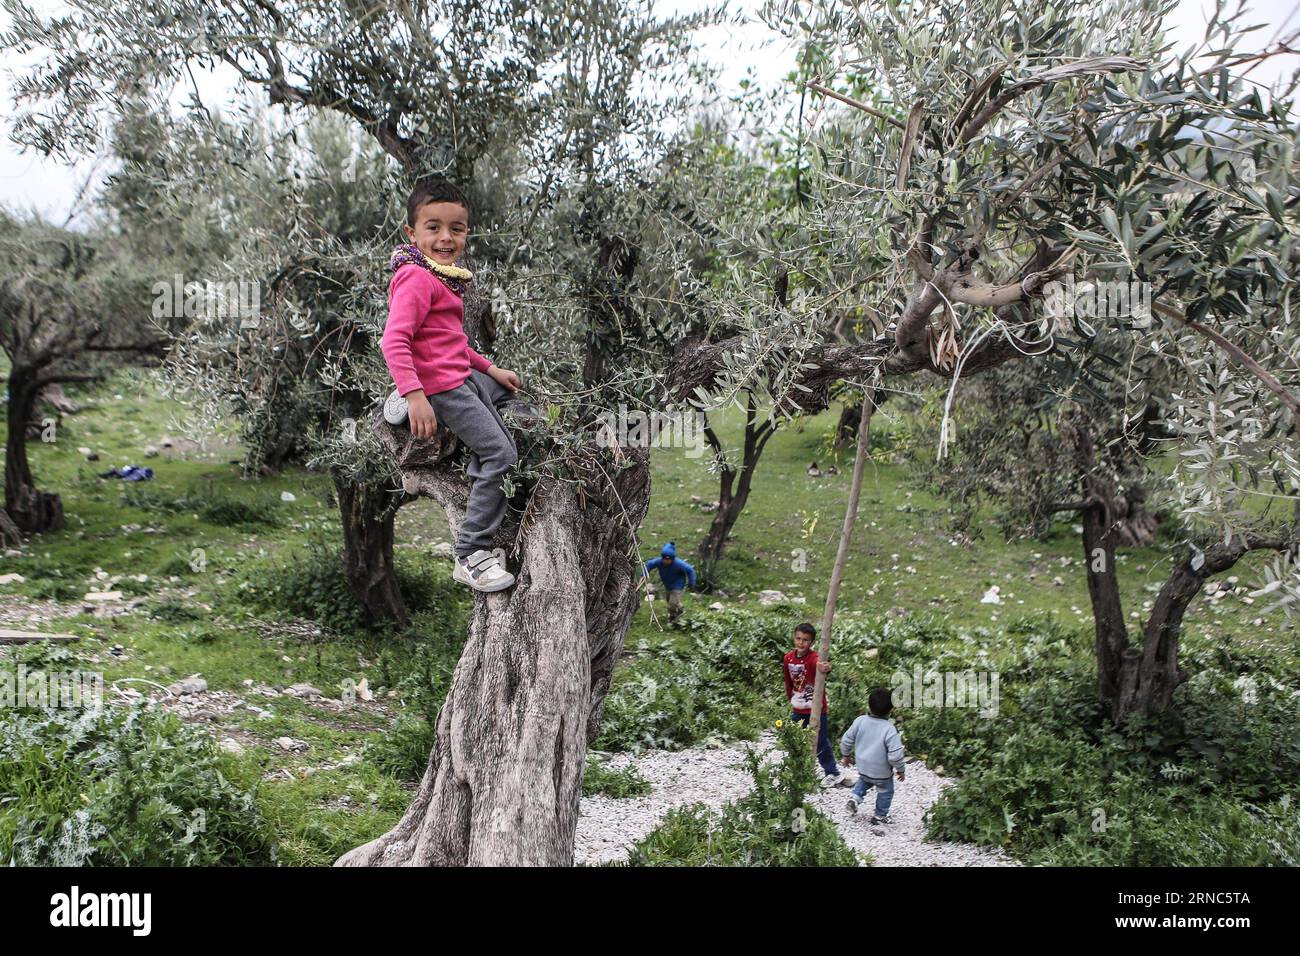 160323) -- LESVOS (GREECE), March 23, 2016 -- Children play climbing on  olive trees inside the Kara Tepe hotspot on Lesvos island on March 22,  2016. The camp which is run by